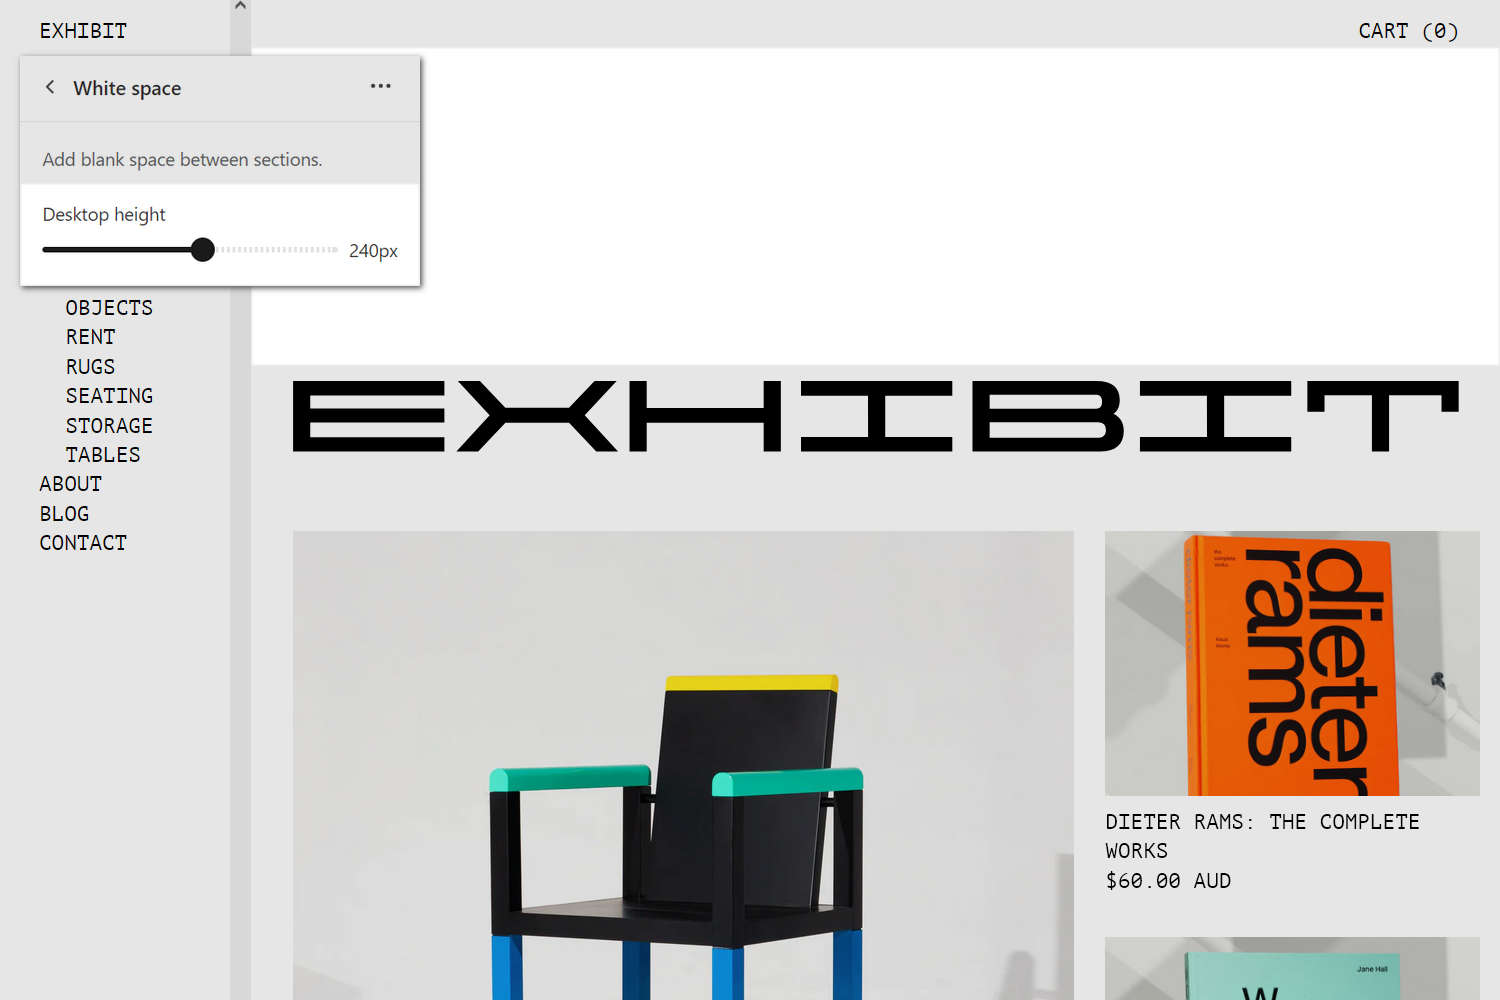 An example White space section on a store's Homepage.